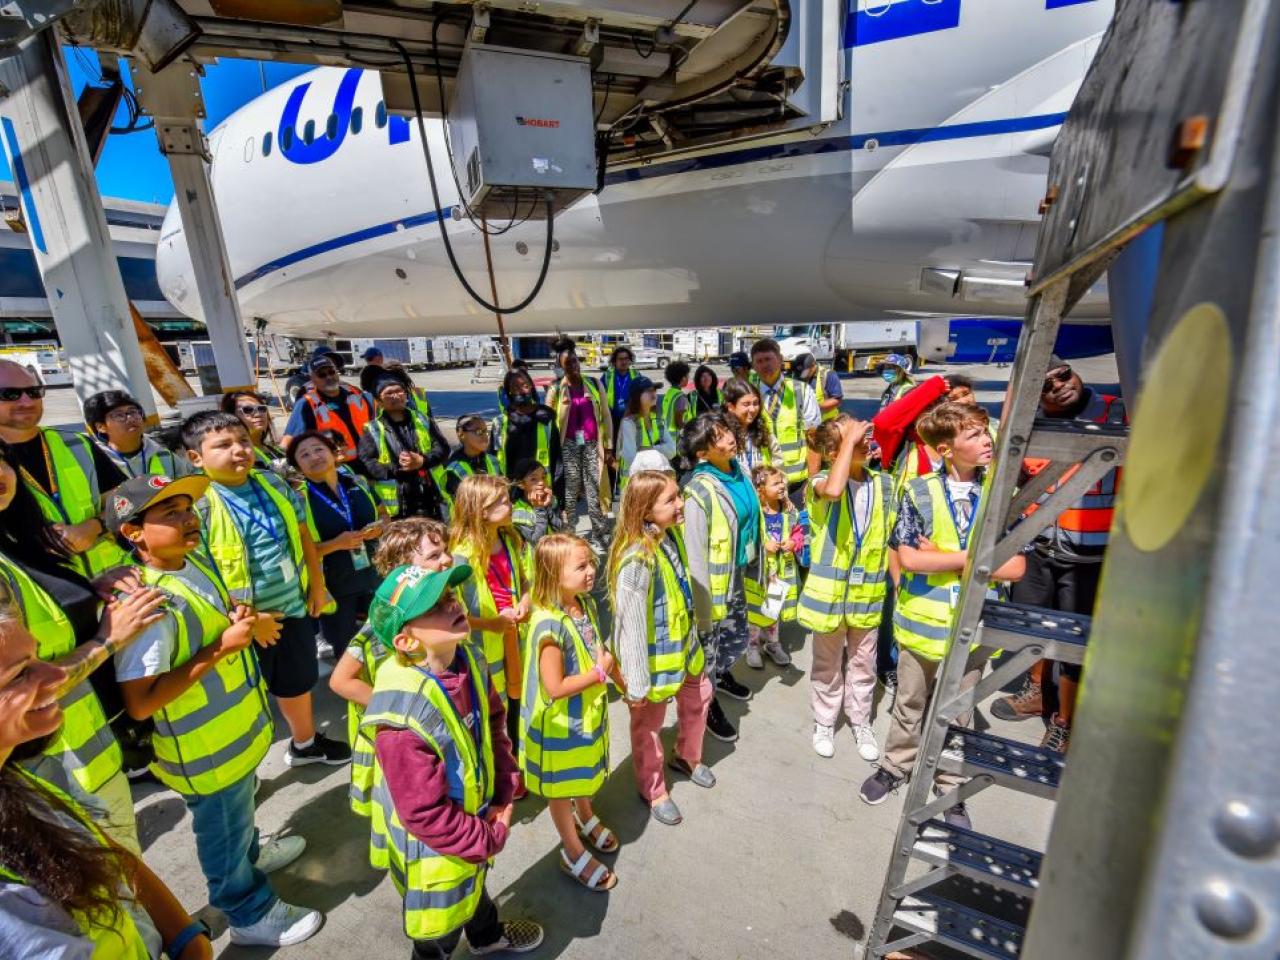 A group of kids and adults in high-vis vests looking up close at an airplane.